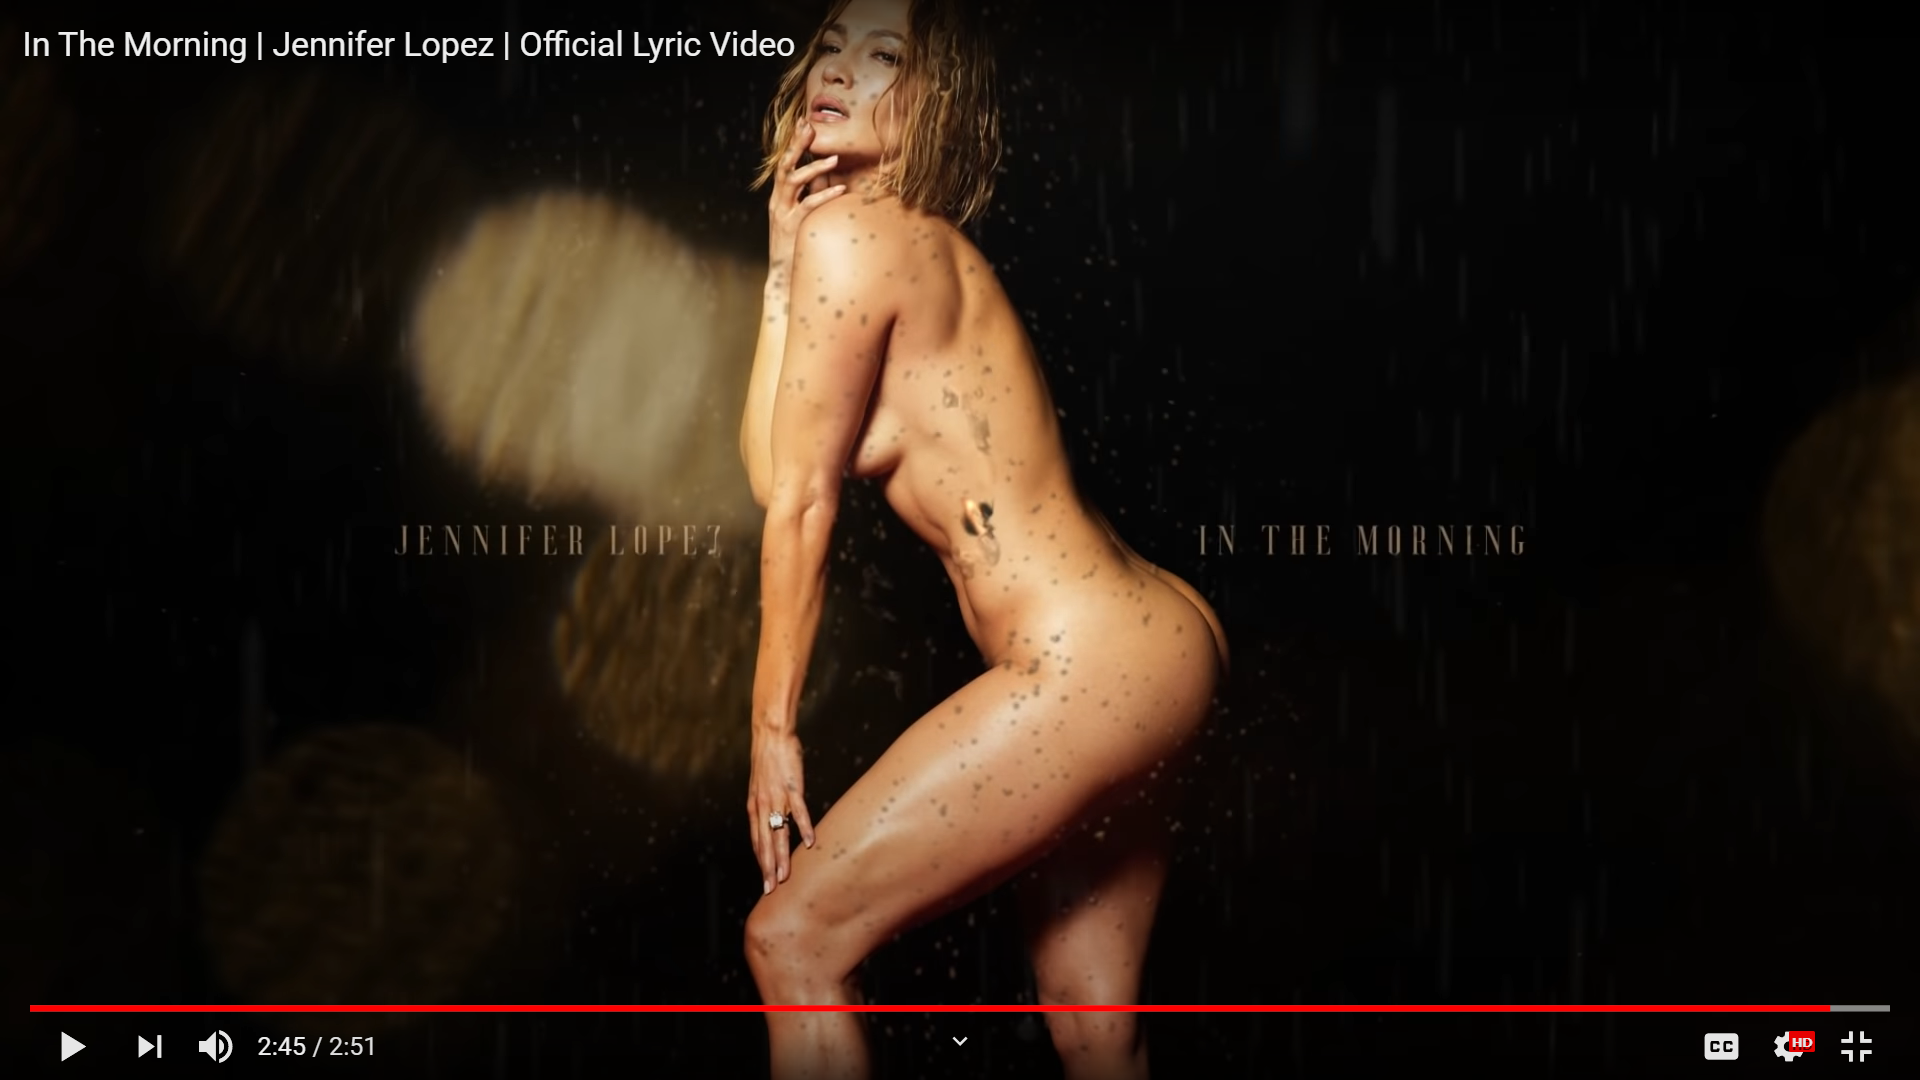 What Jennifer Lopez is not wearing on the cover of her new album "...